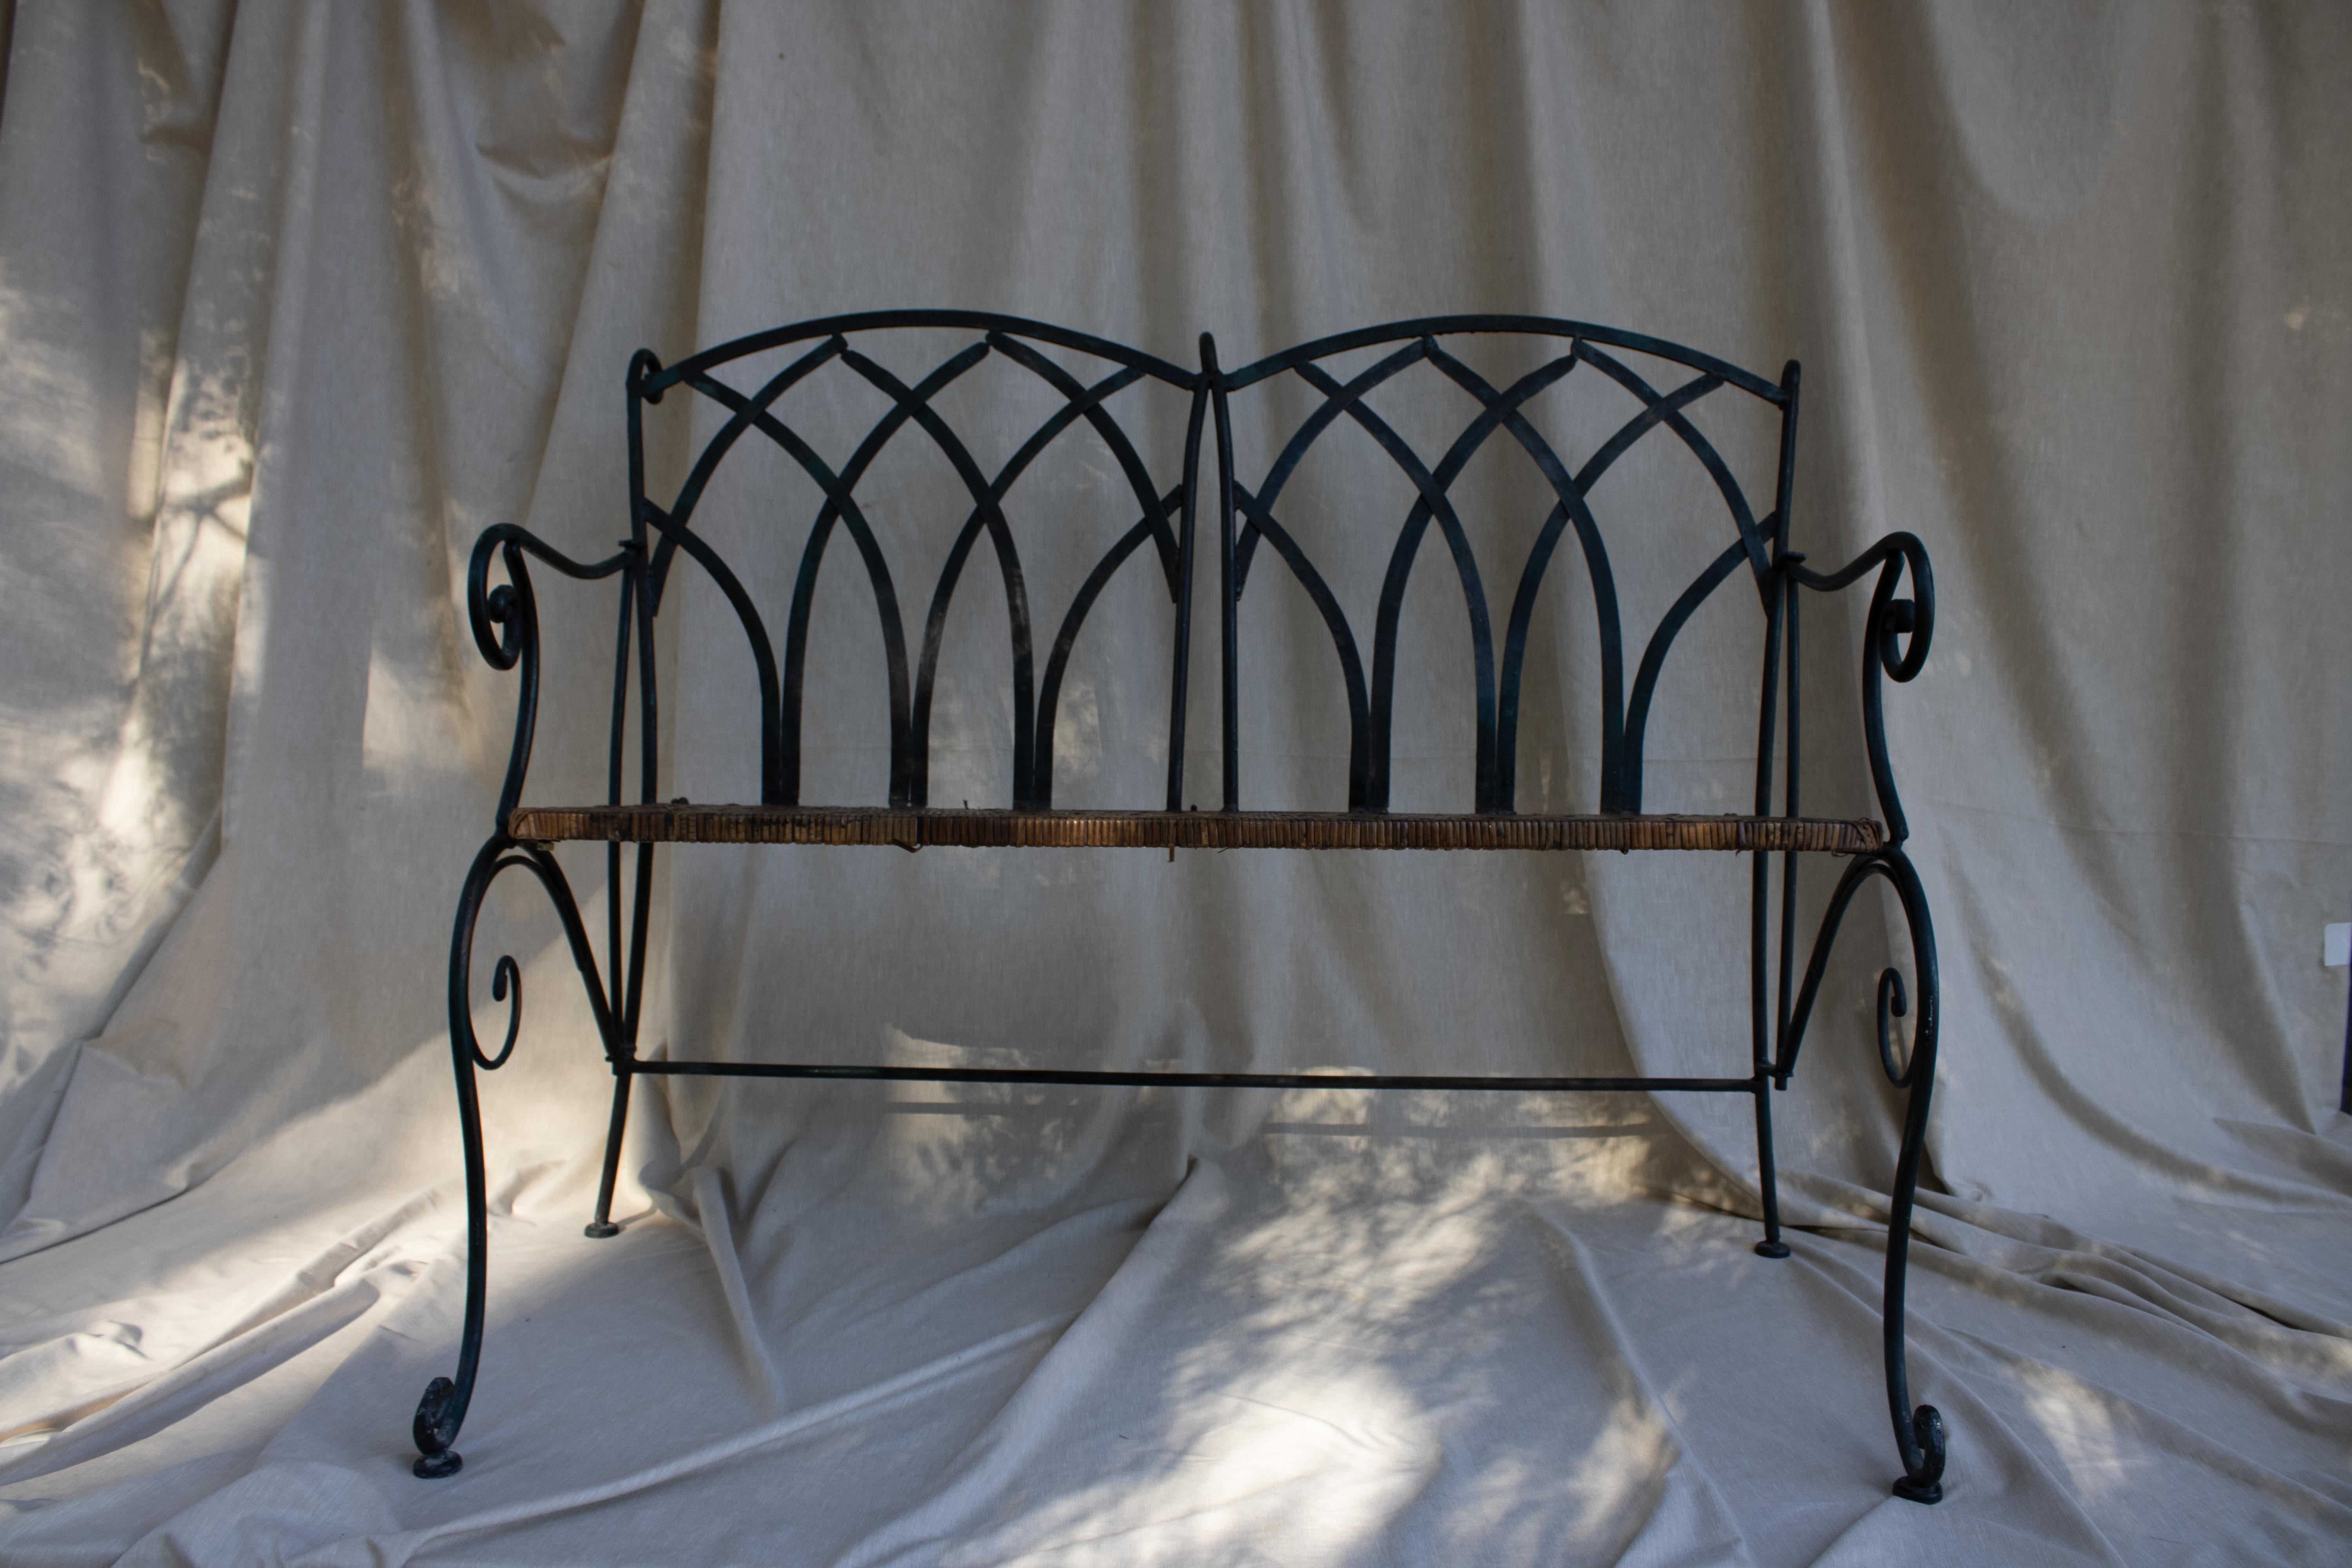 French garden benches made from iron and straw are a charming and rustic variation of traditional garden benches. These benches typically feature a sturdy iron frame for durability and stability, combined with a seat and sometimes a backrest made